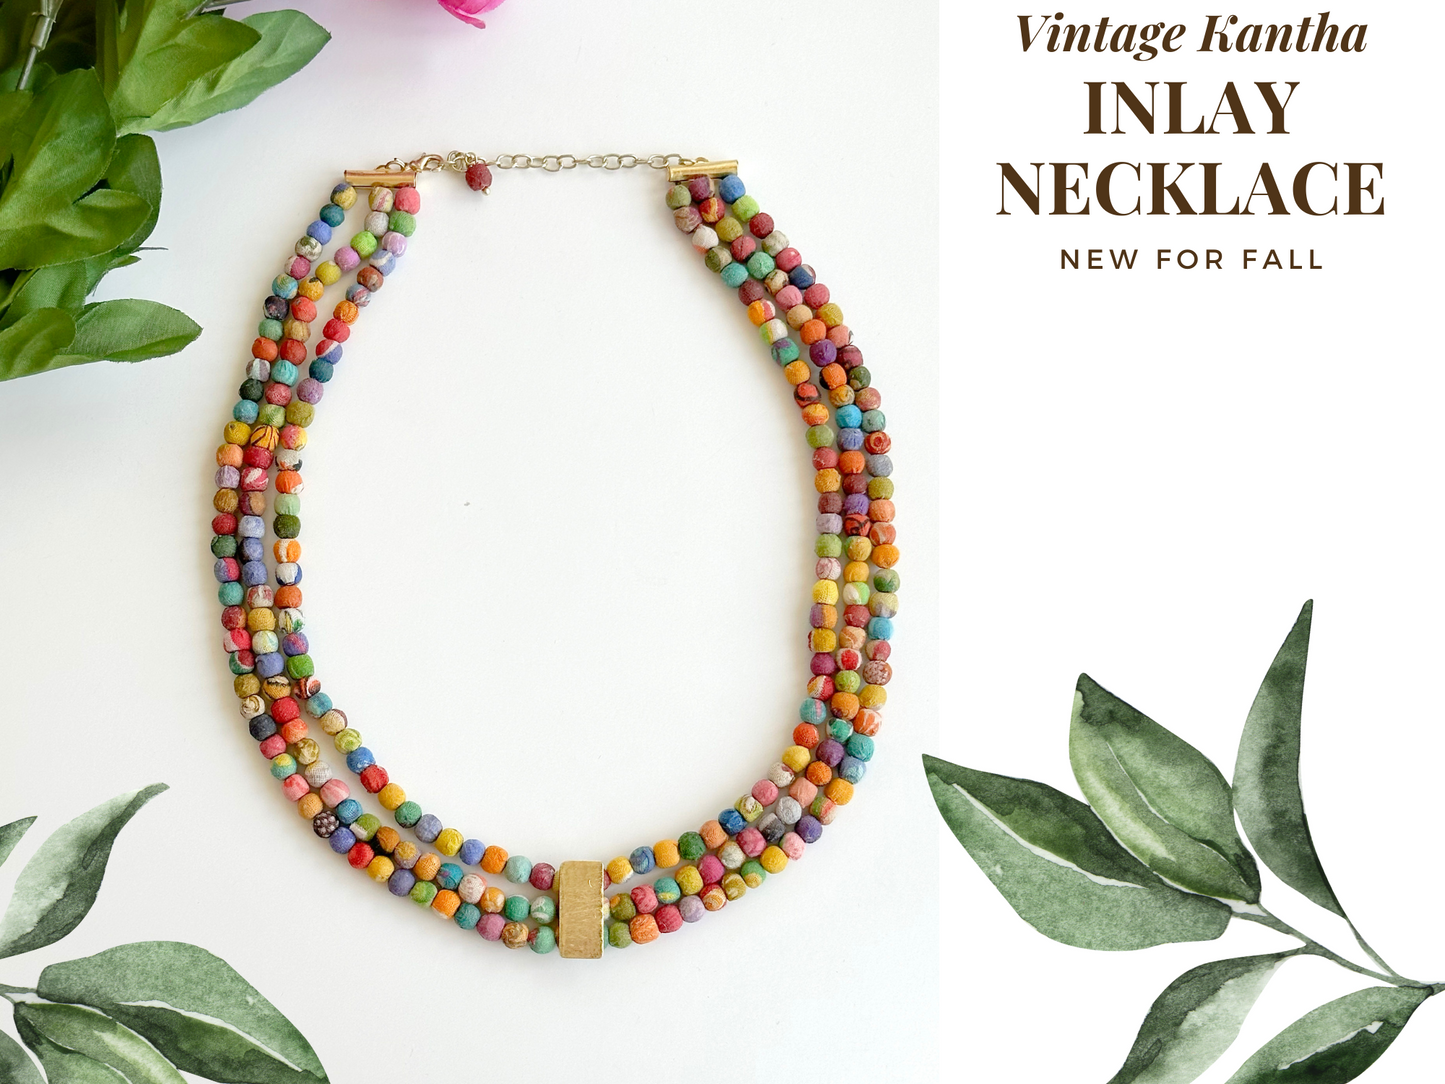 Vintage Kantha Inlay Necklace